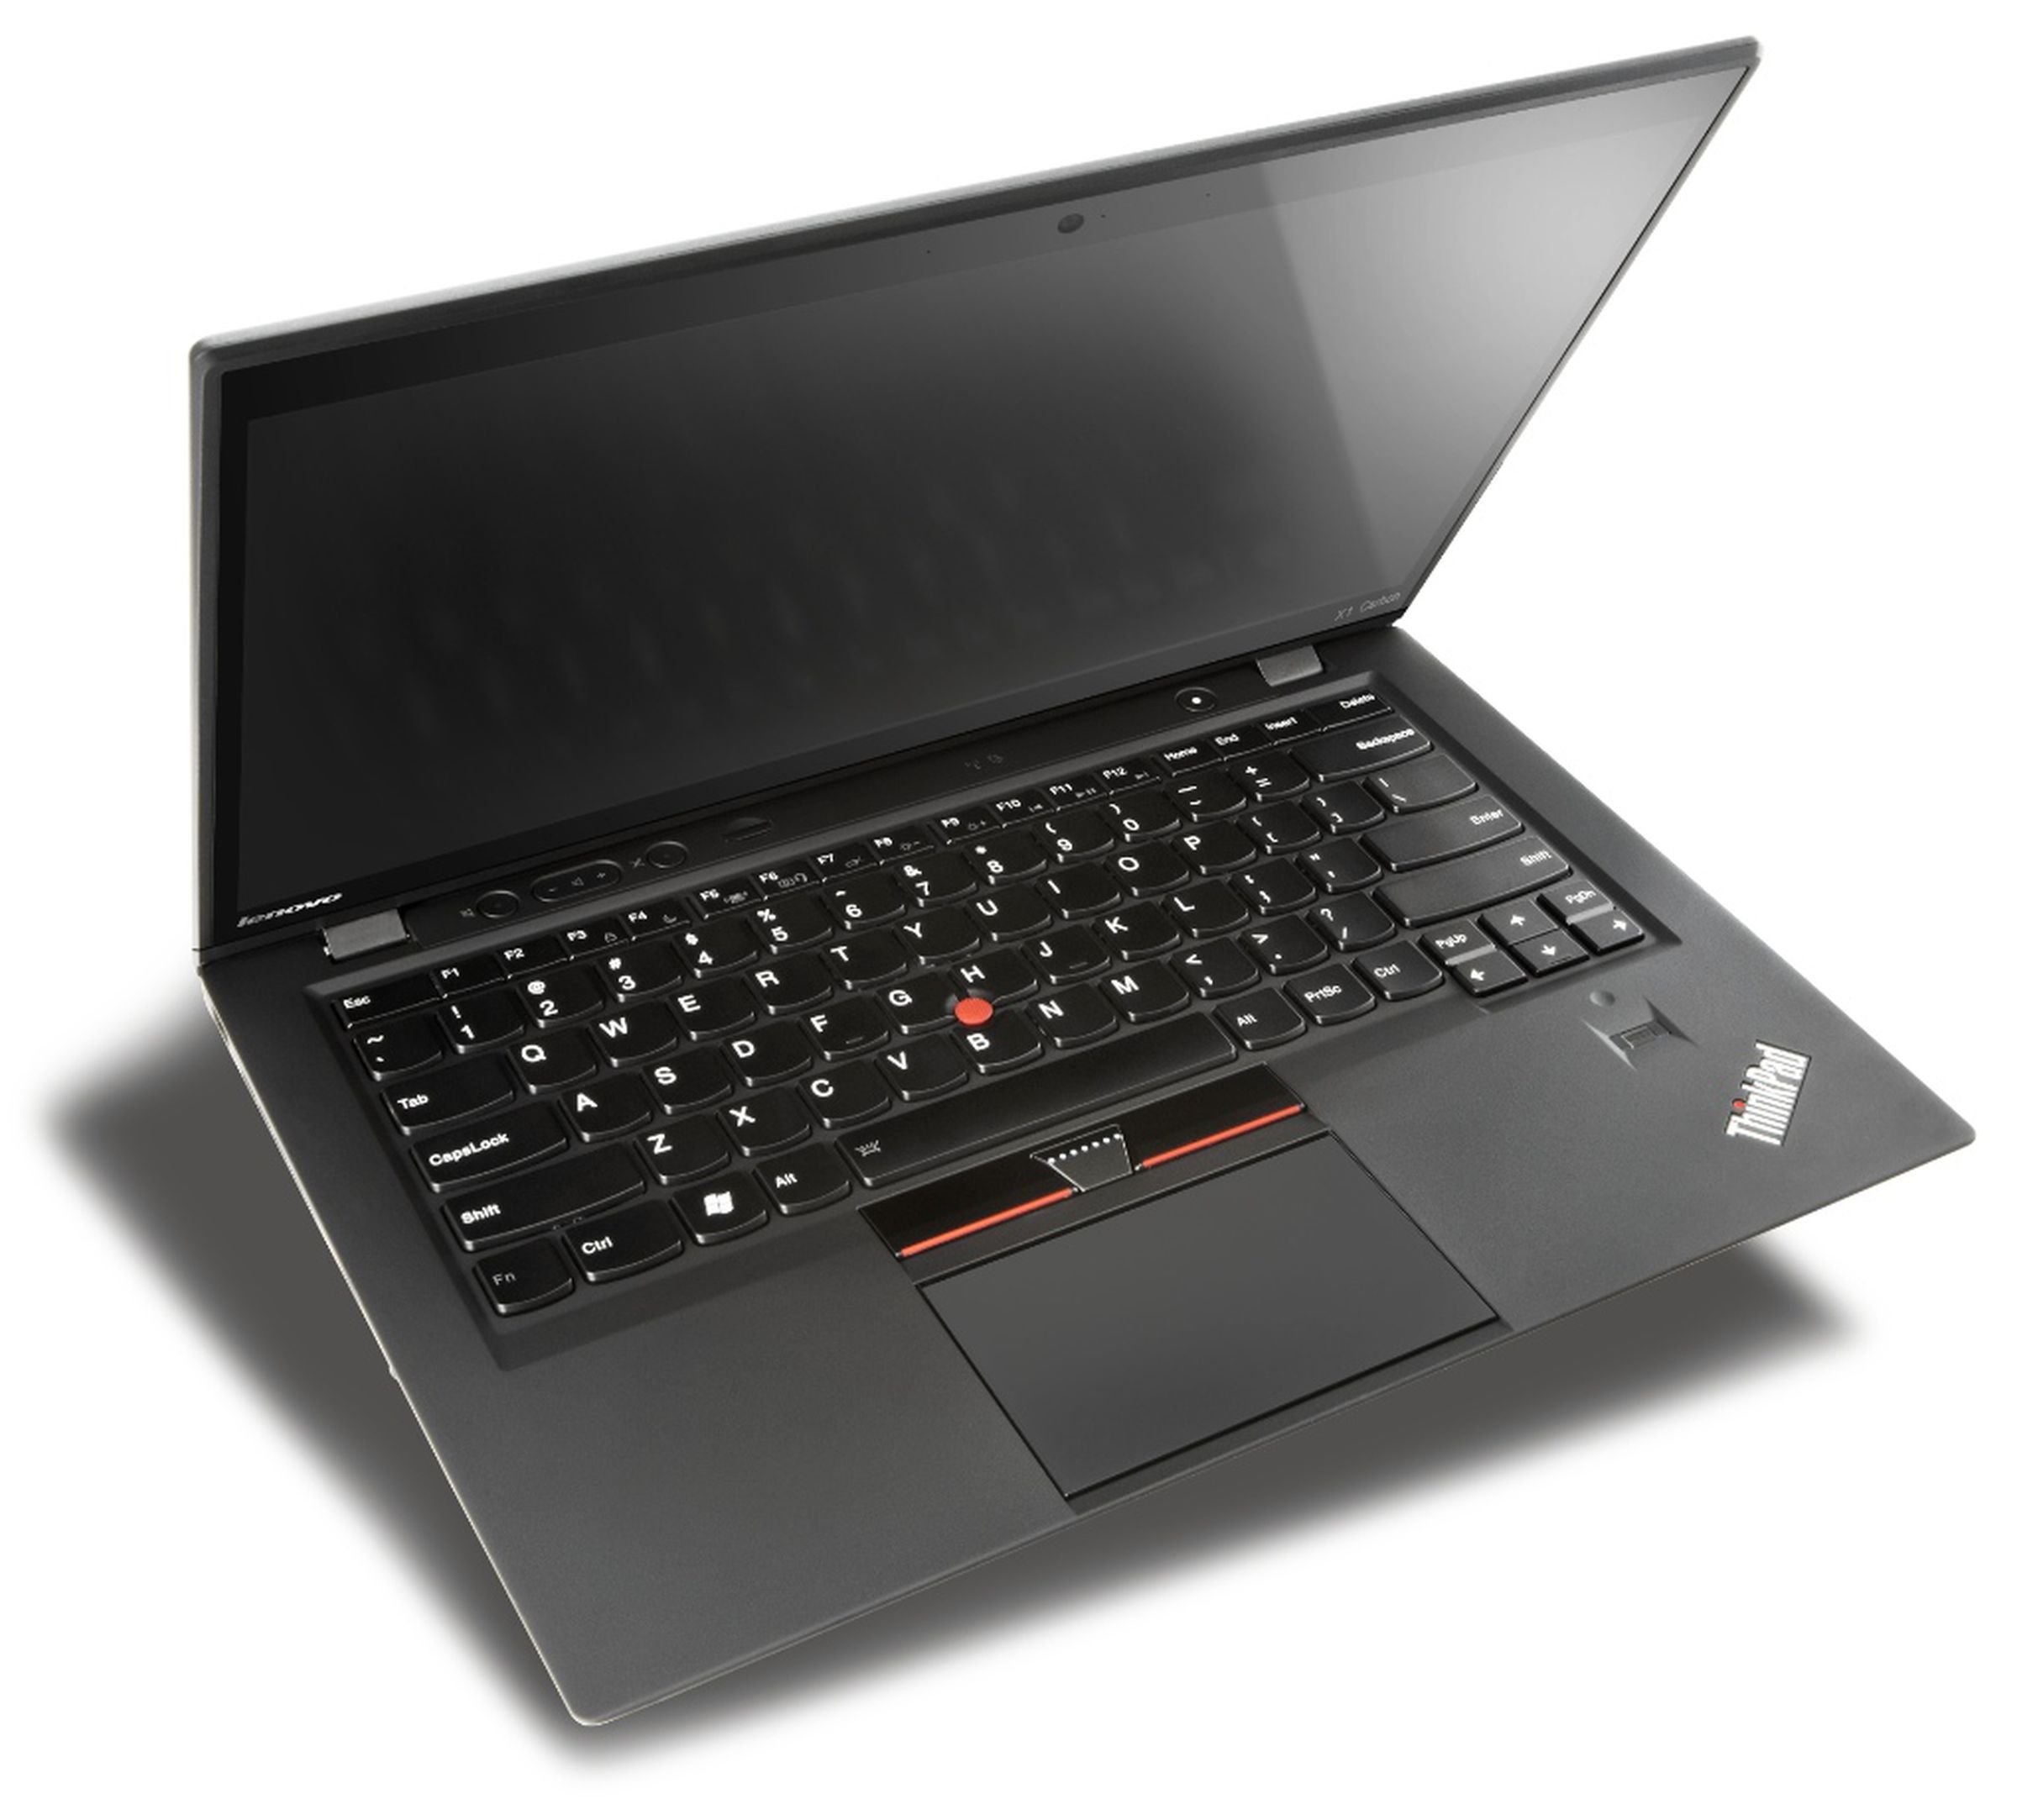 Lenovo ThinkPad X1 Carbon Touch press images